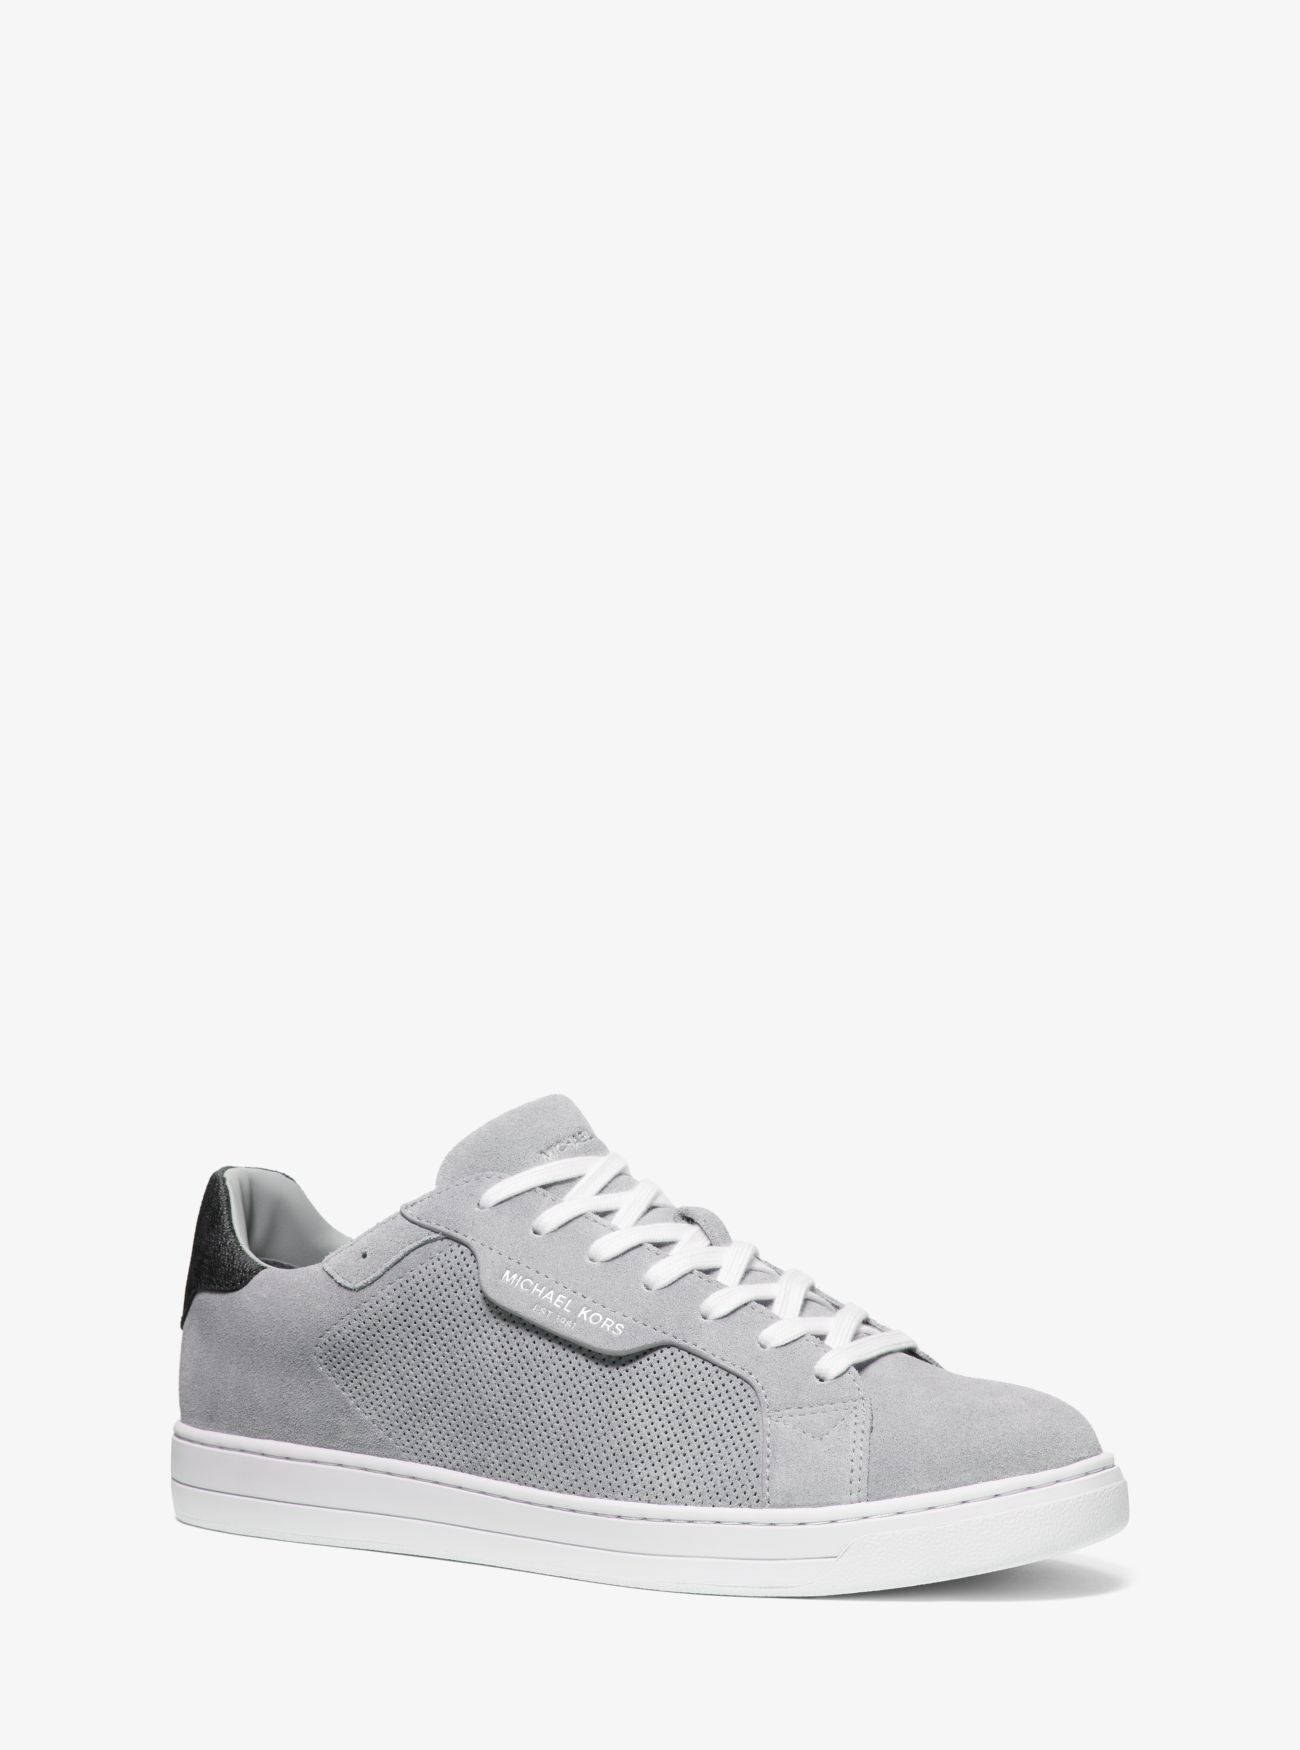 MK Keating Perforated Suede Trainers - White - Michael Kors